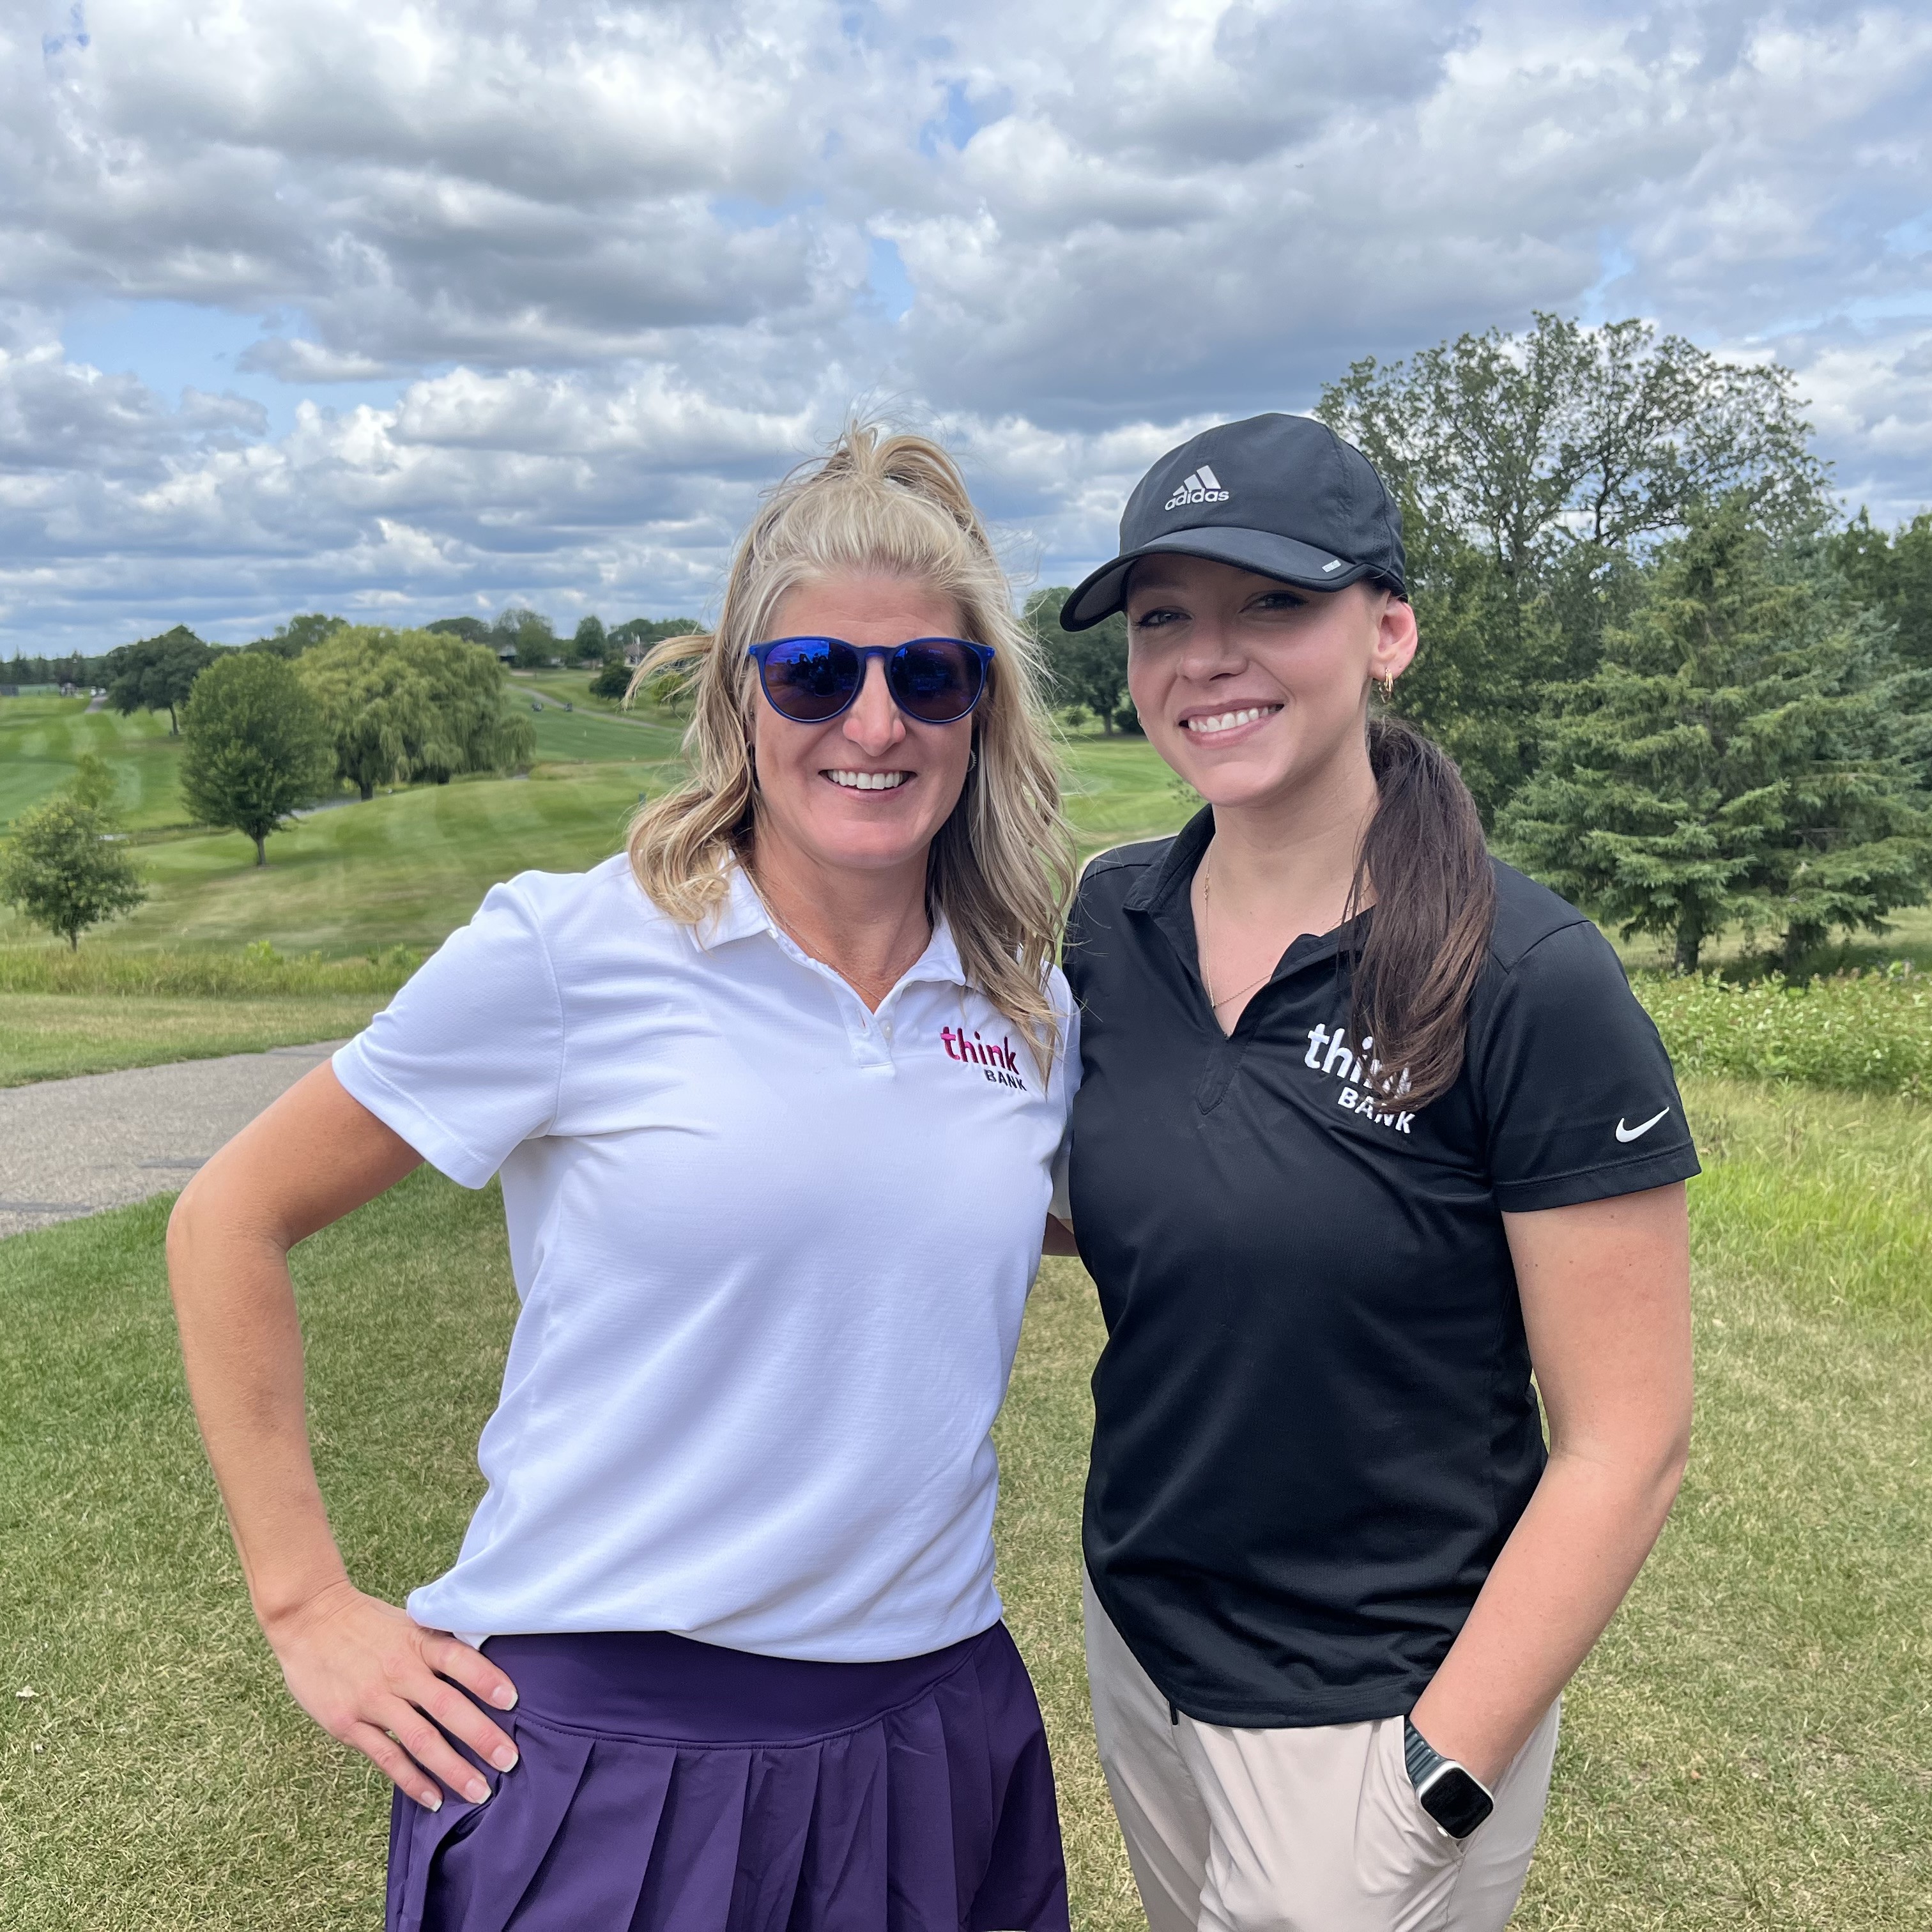 Two Think Bank employees on the golf course for a community event.